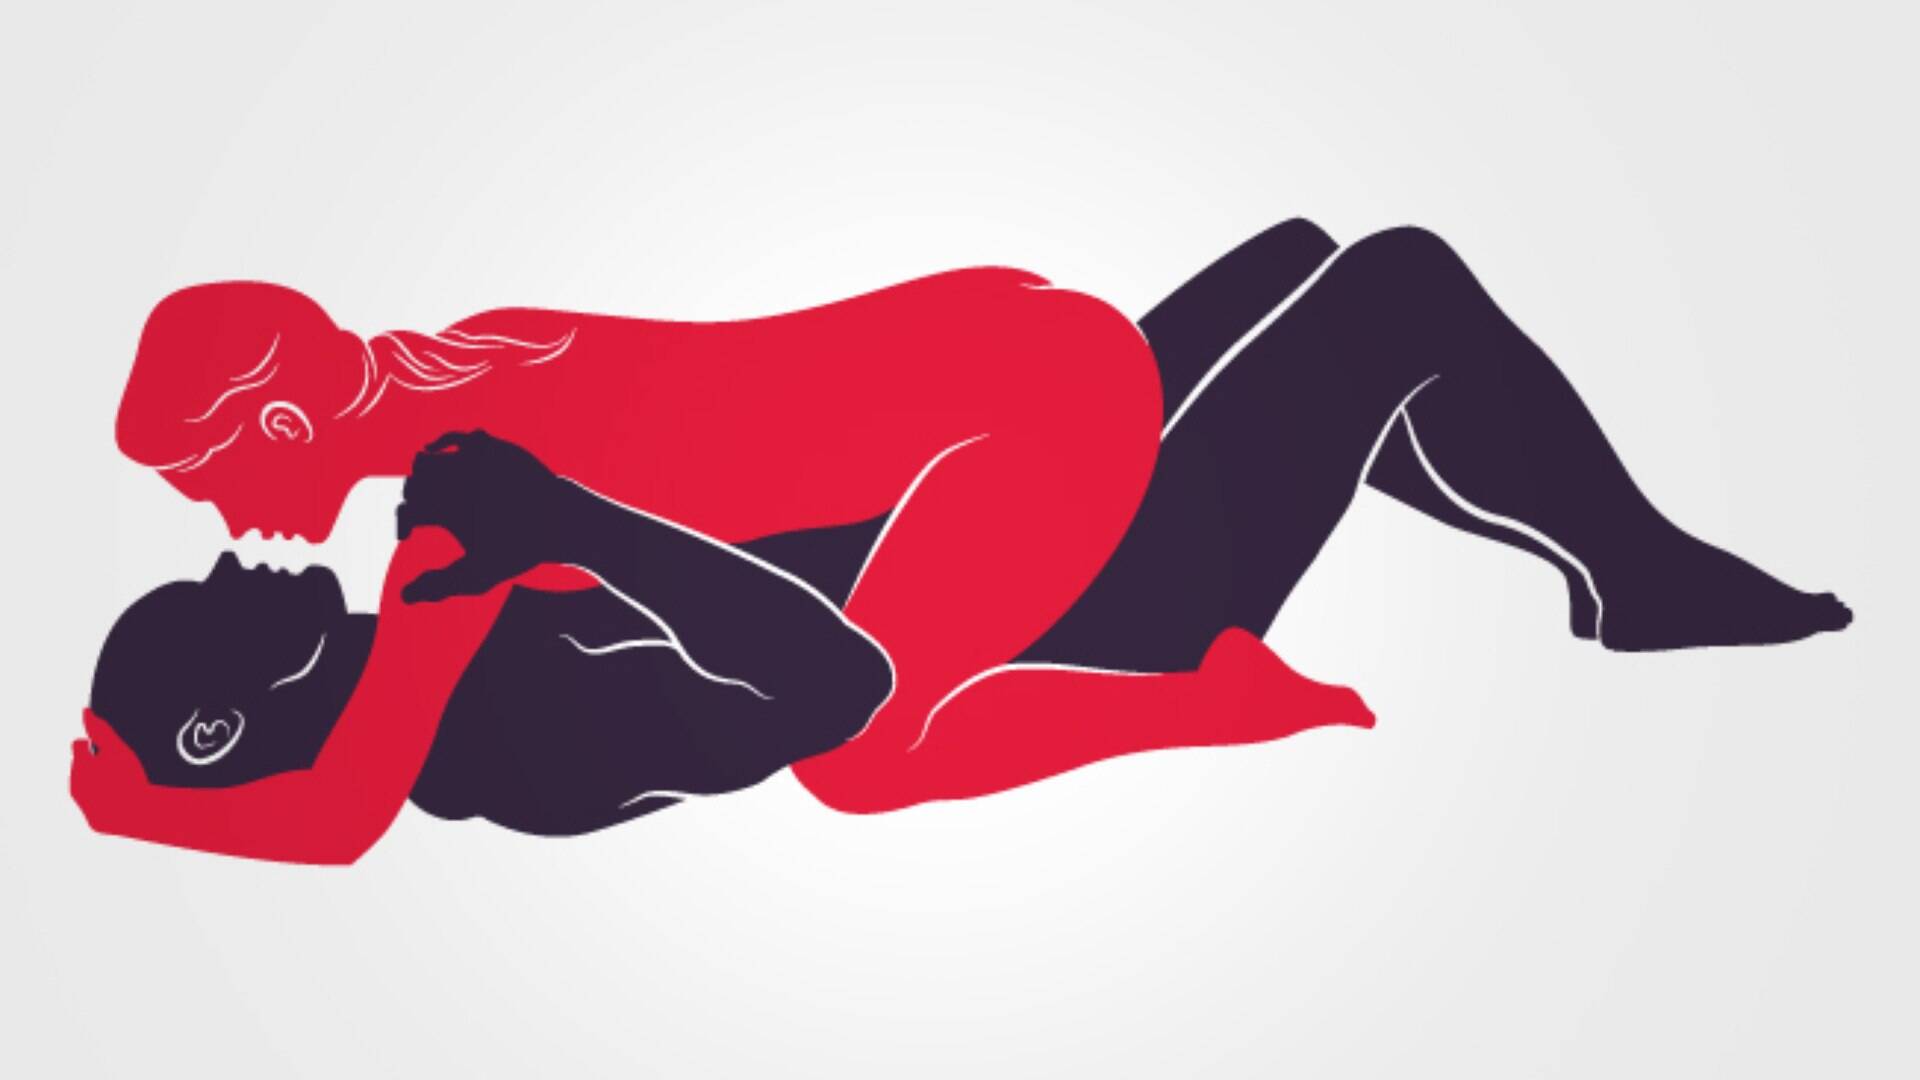 Kamasutra sexual positions lovers